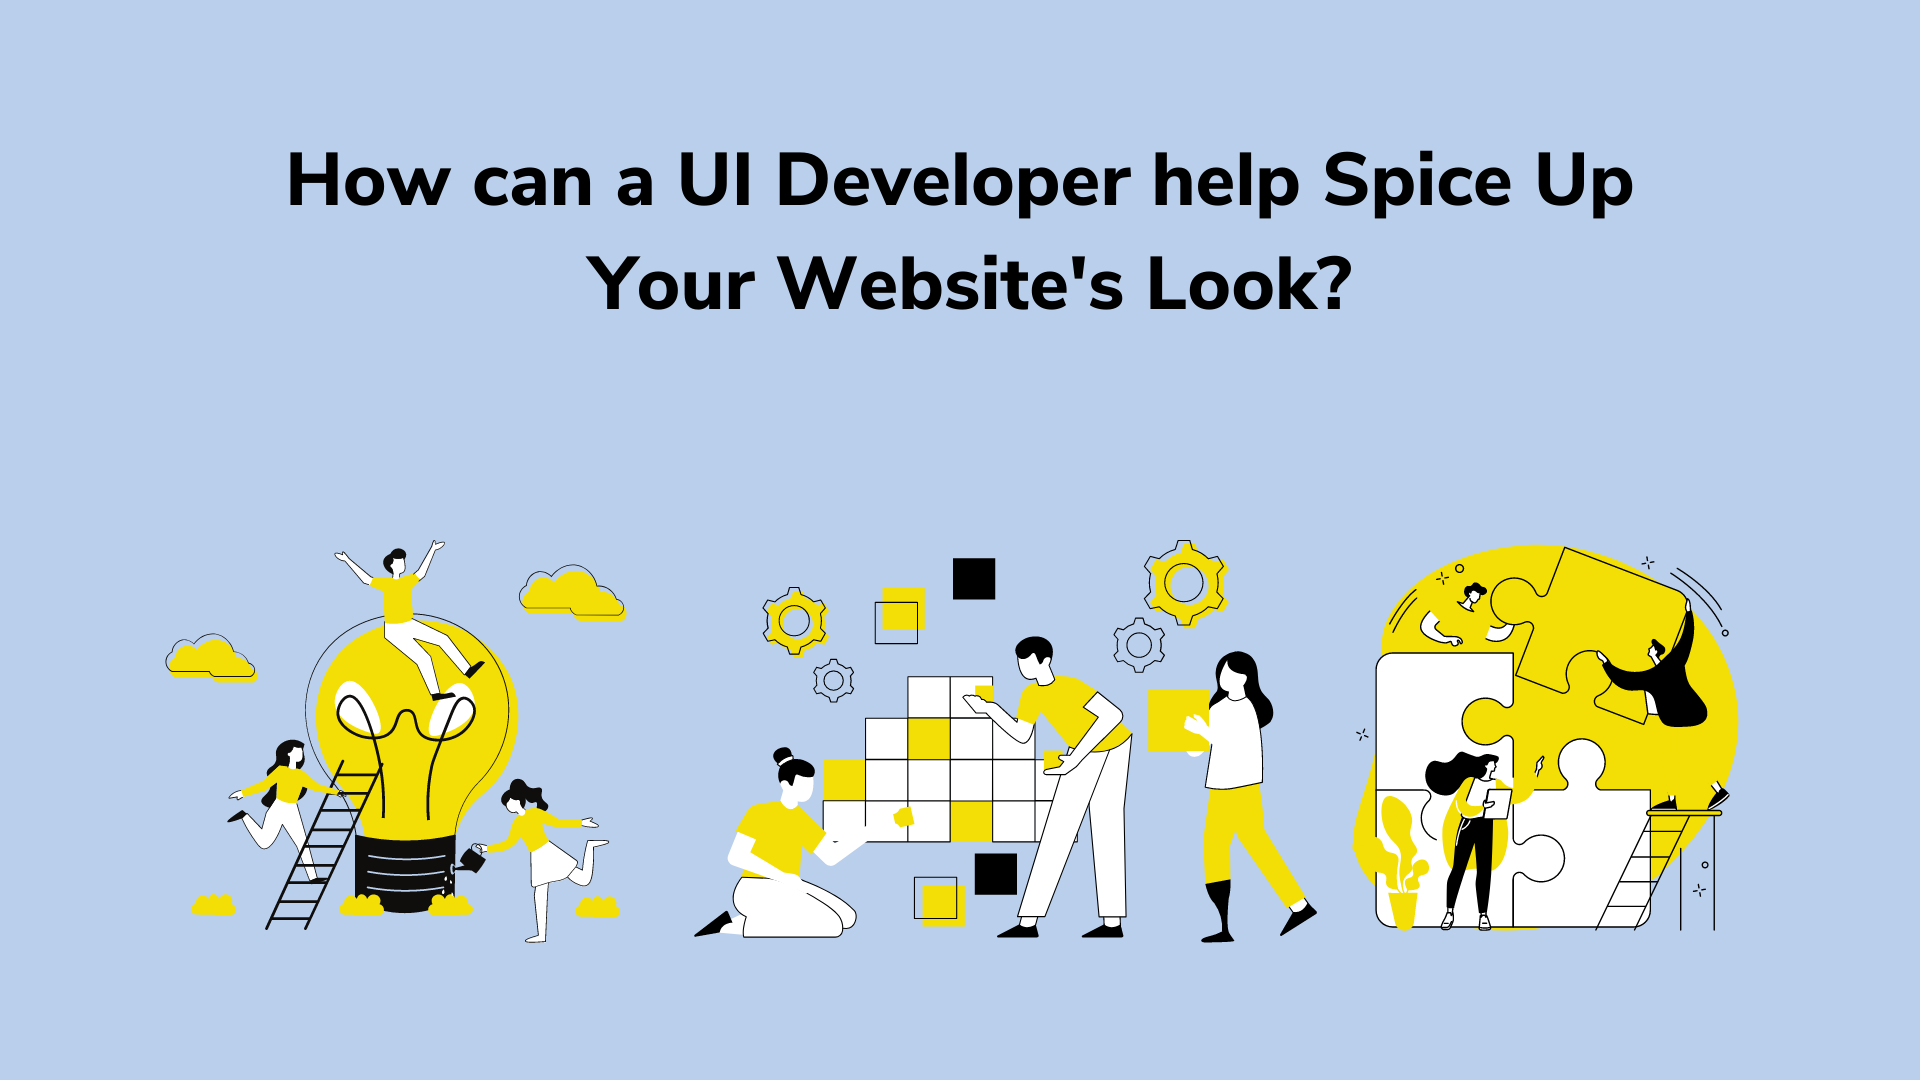 How can a UI Developer help Spice Up Your Website’s Look?